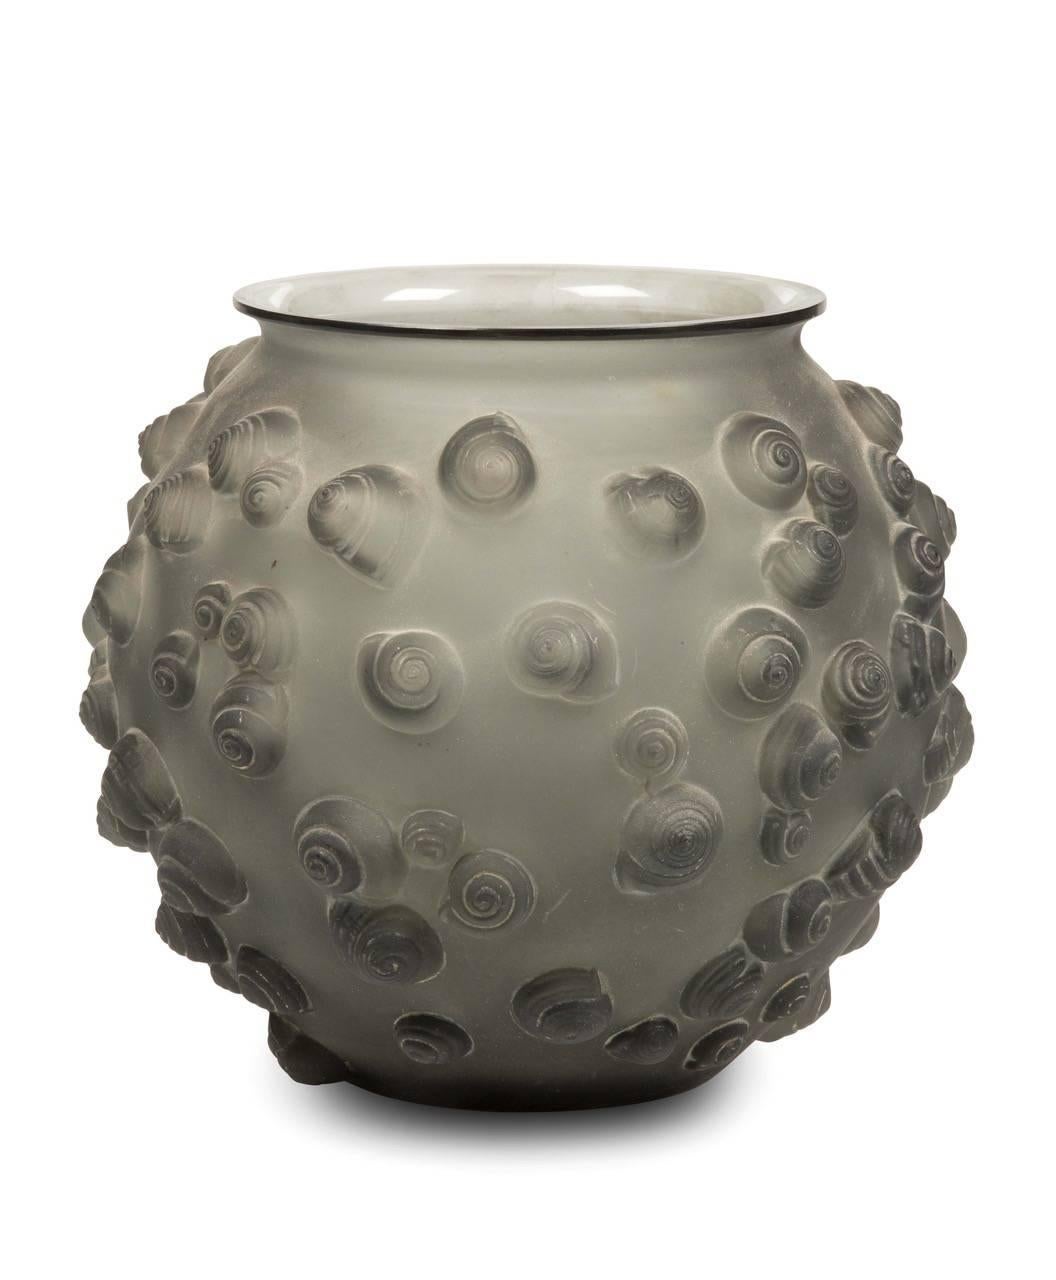 "Palissy" vase in grey blown and moulded opalescent glass. The decor made up with snails in relief. Signed.

History
The model created the 12th, November 1926, in the catalogs of 1928 and 1932, erased of the catalog in 1938 and not